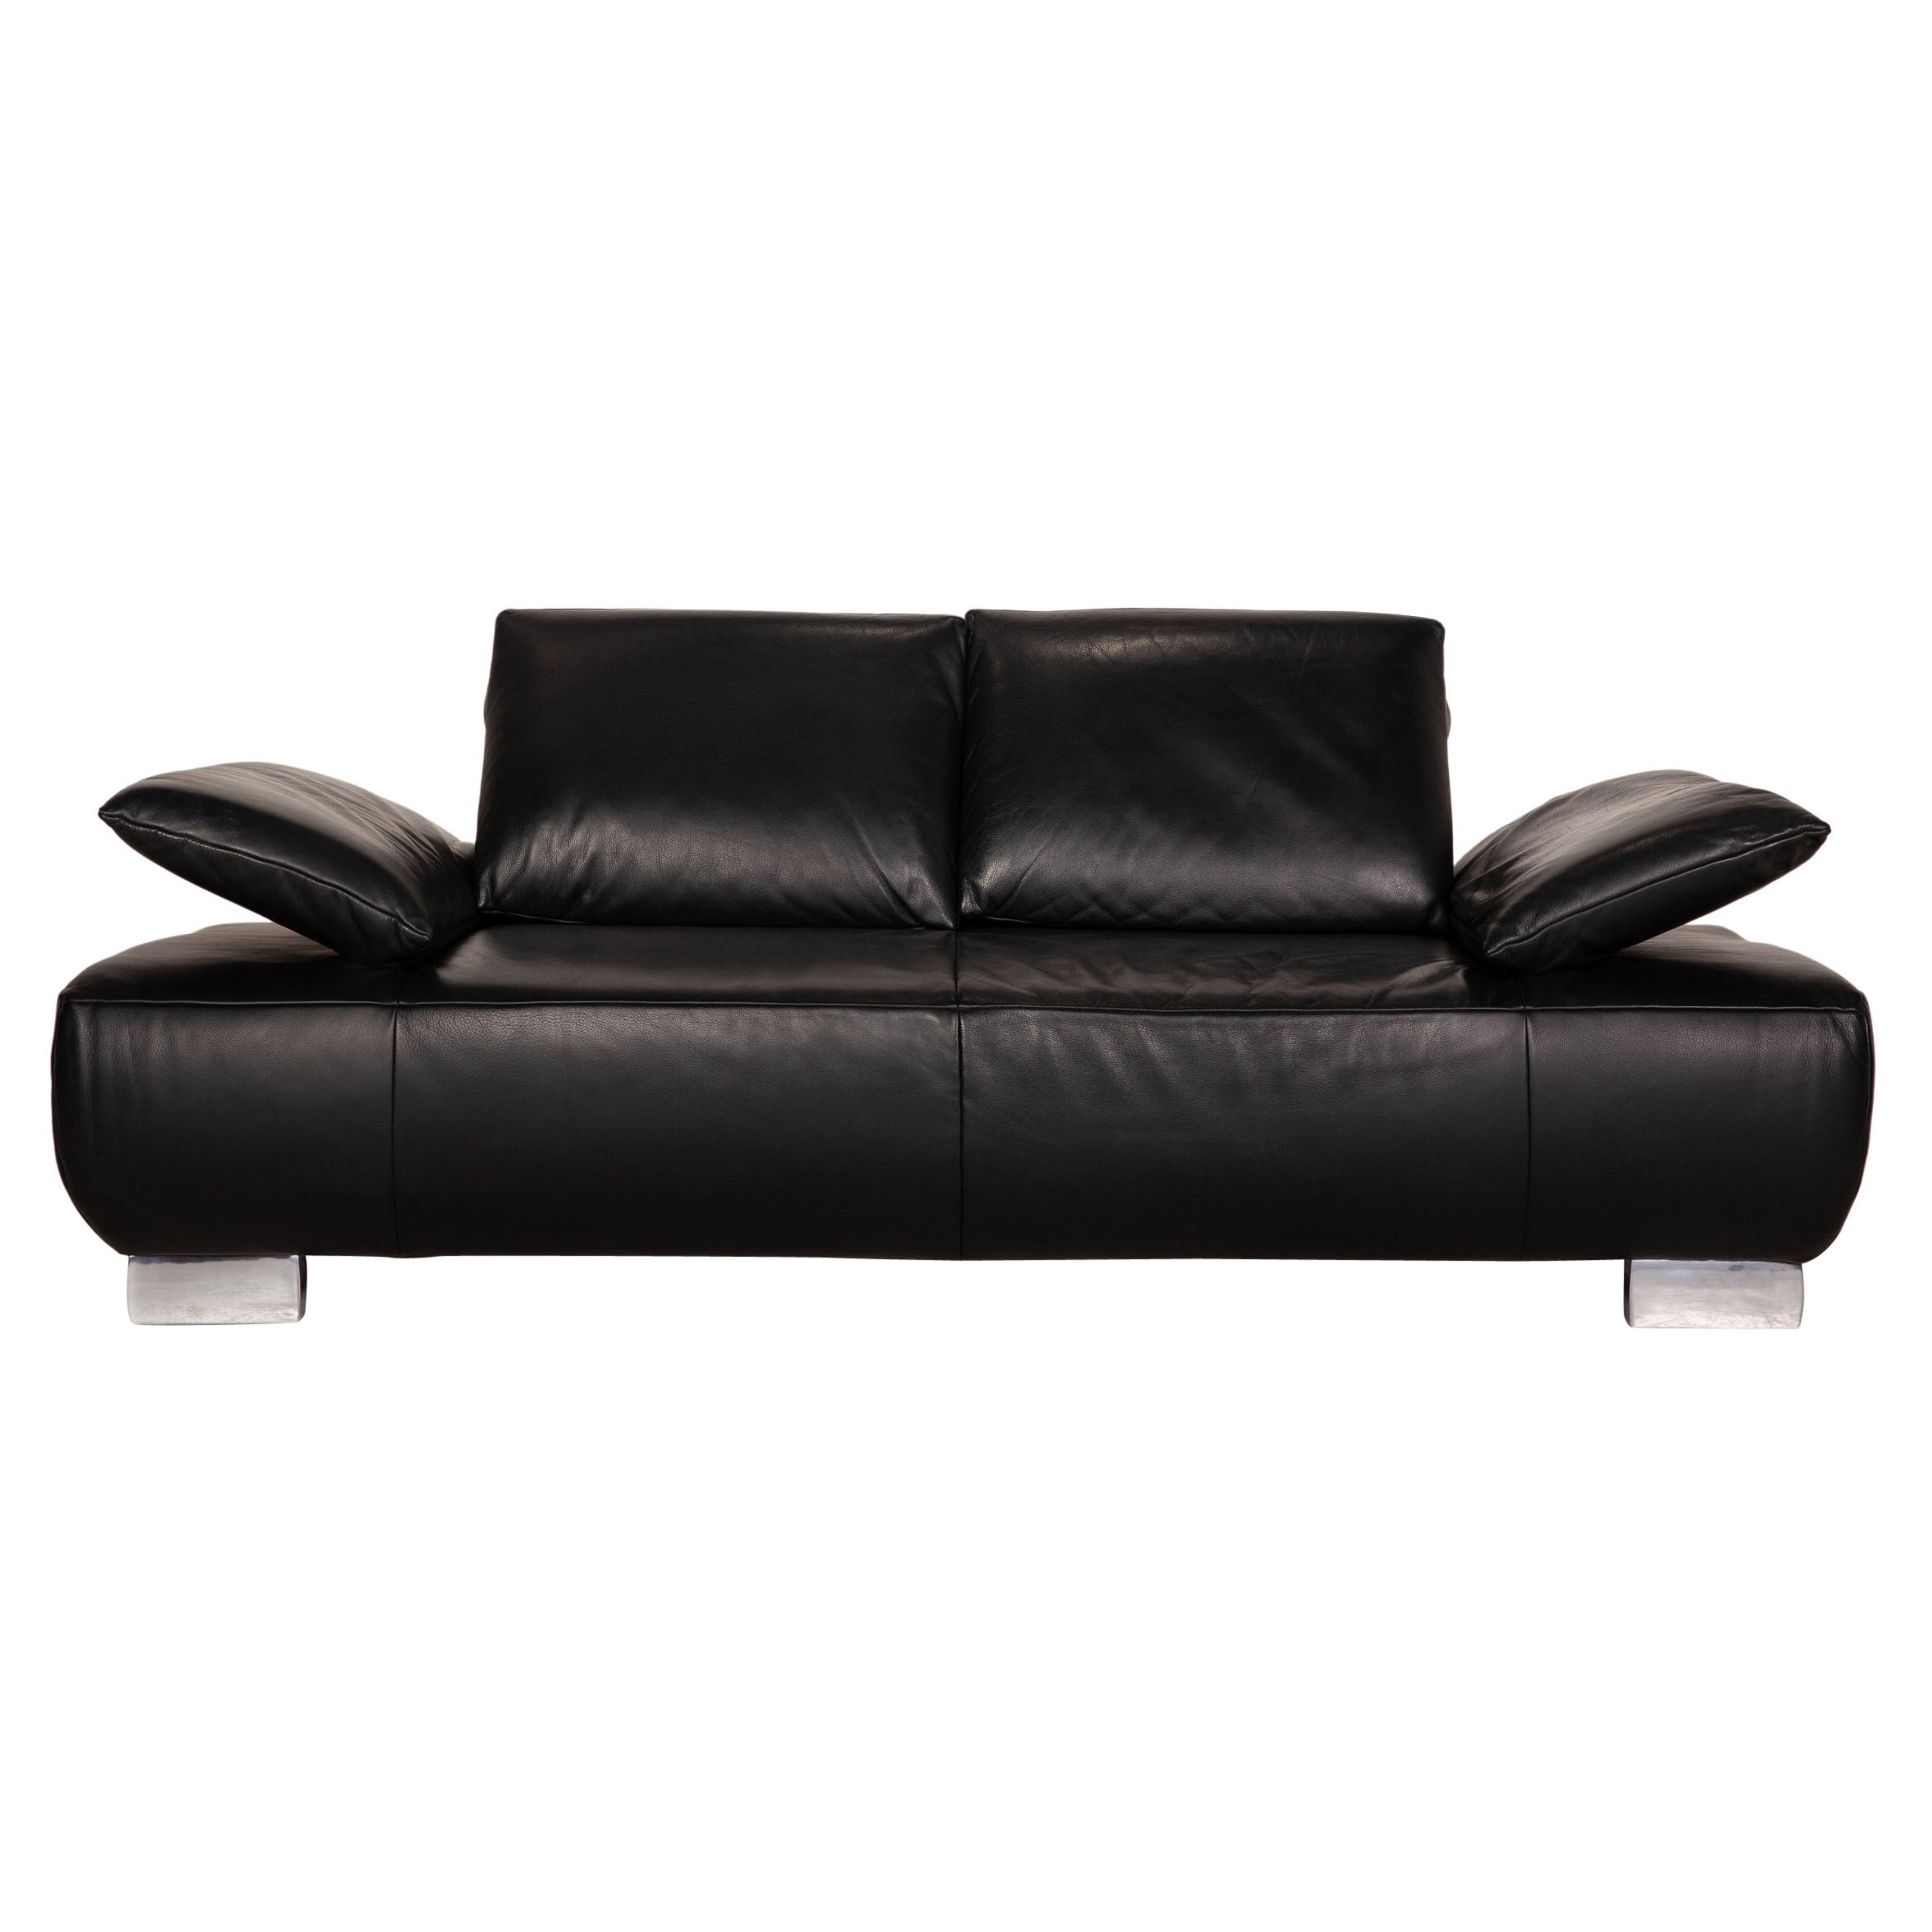 Koinor Volare Leather Sofa Black Two Seater Couch Function For Sale